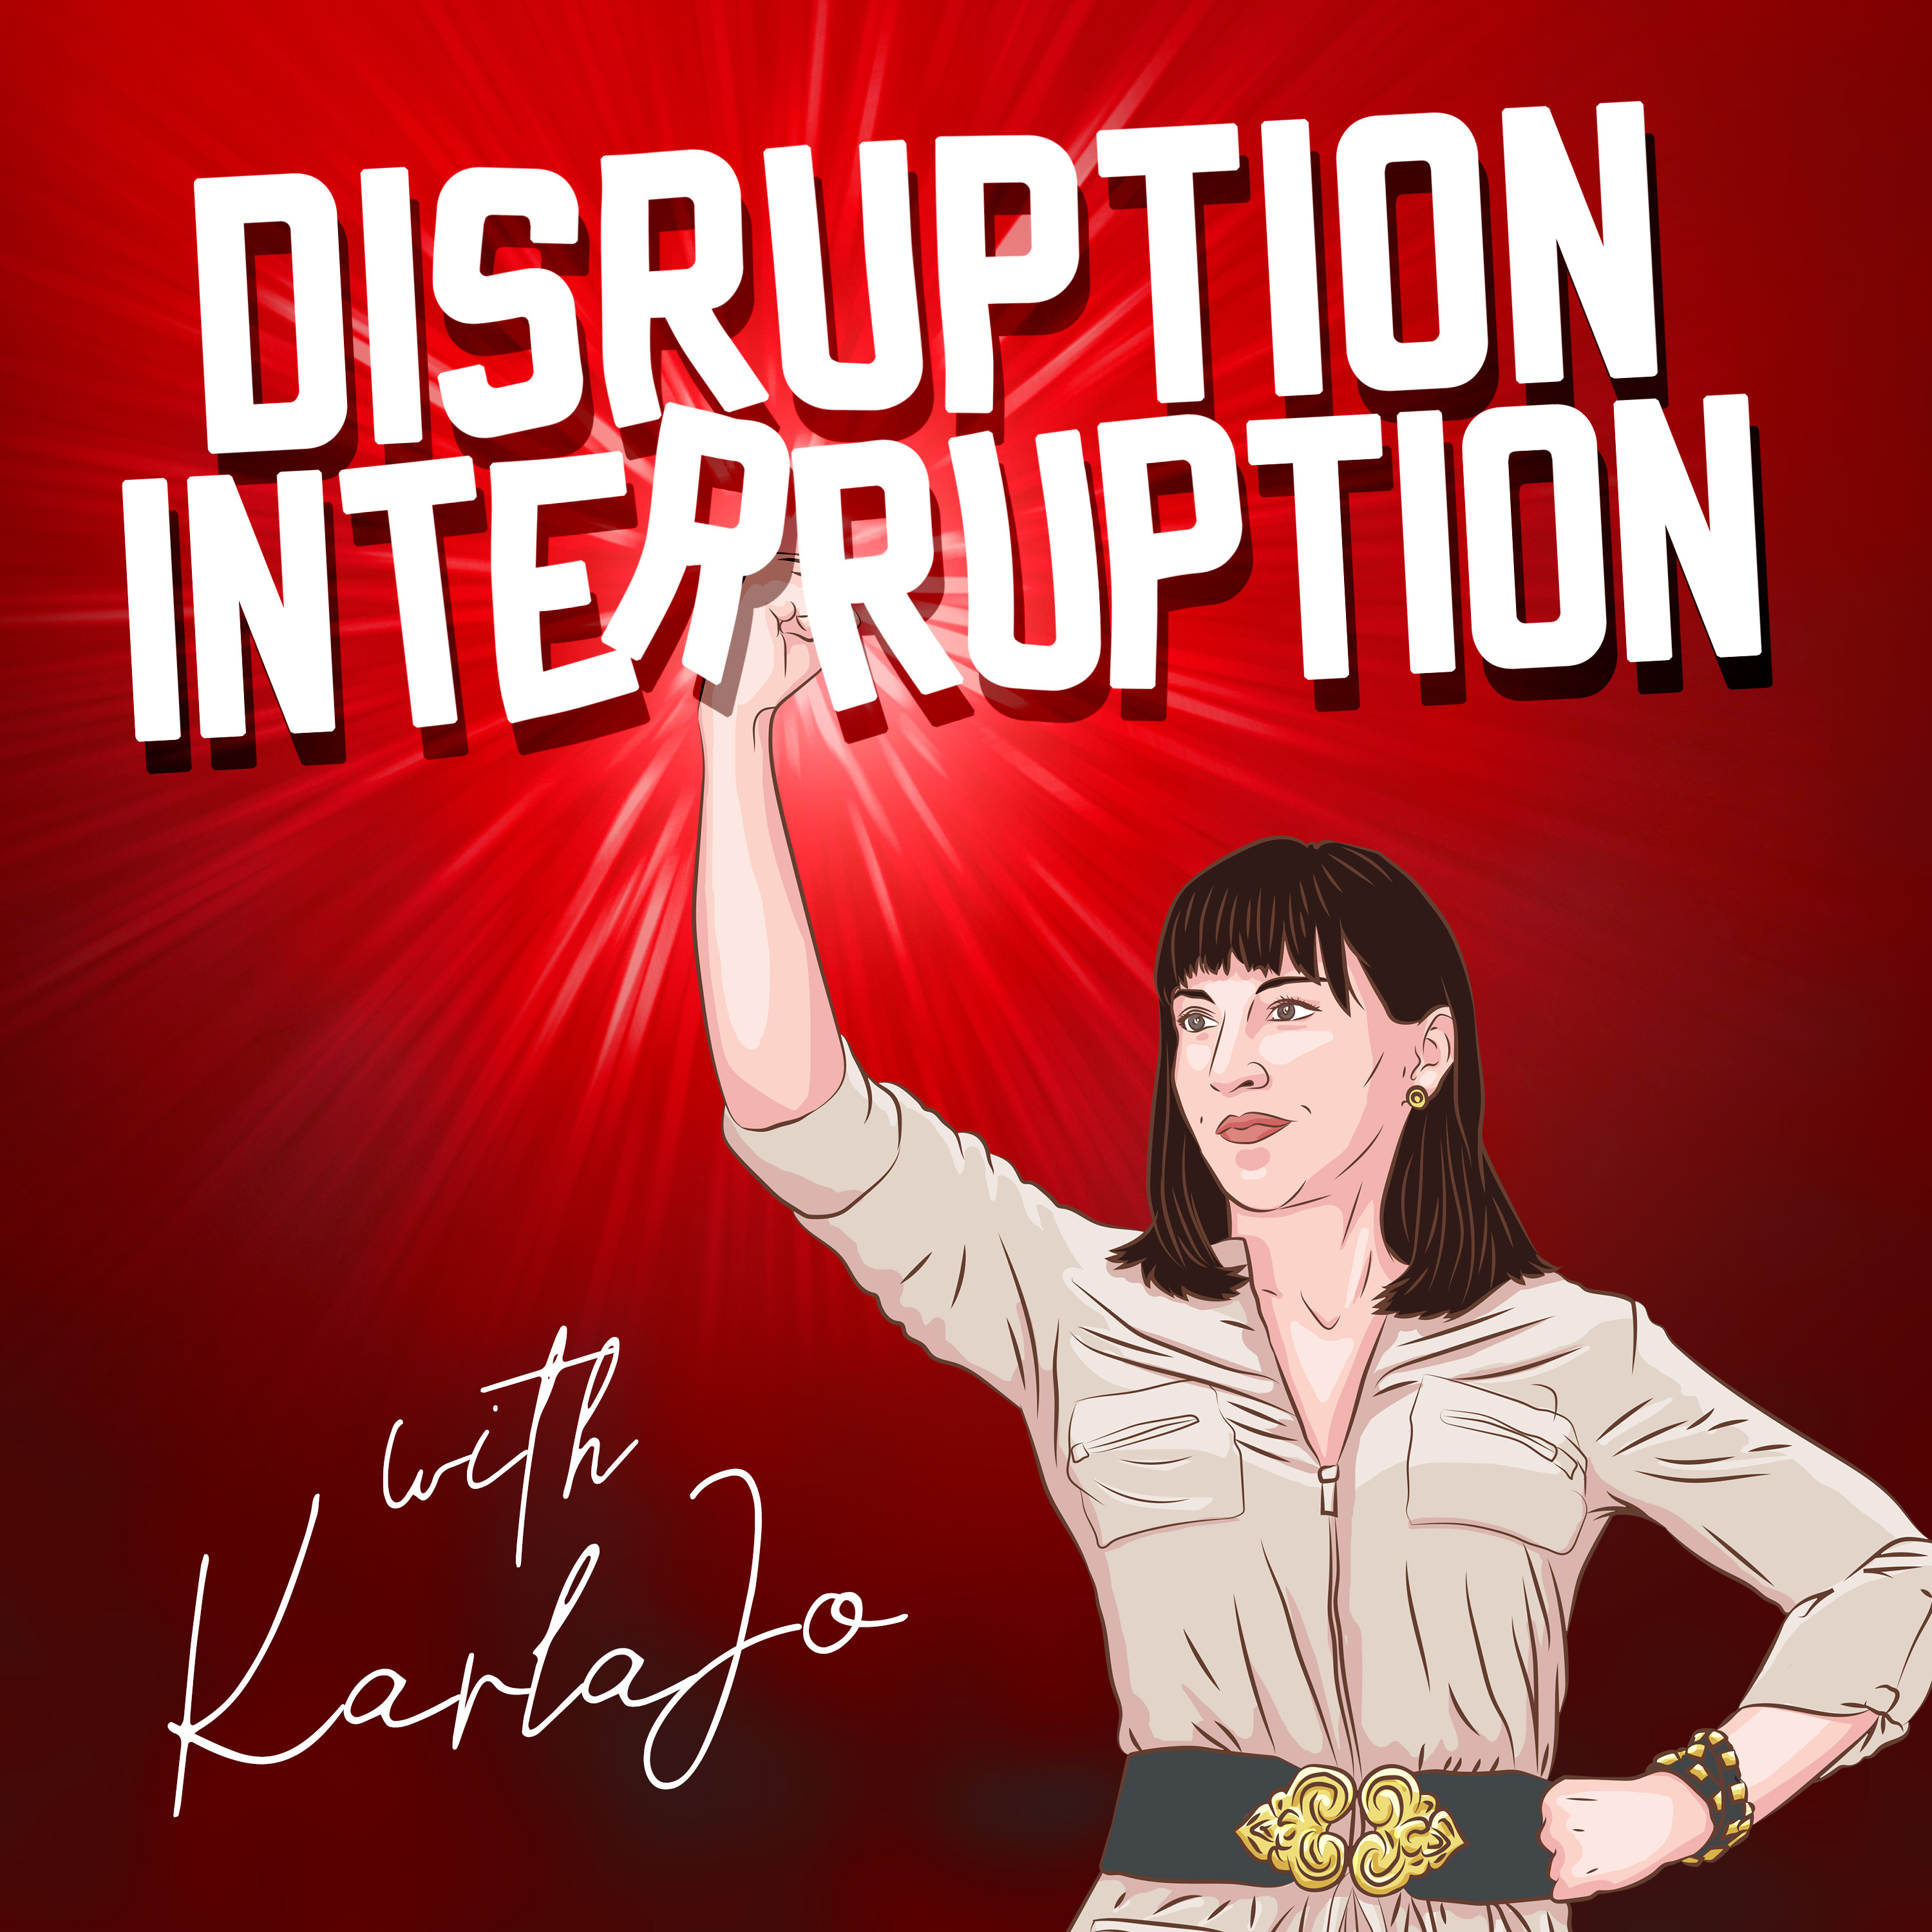 Disruption Unveiled: The Post-Pandemic Workforce and Human Capital with David Leighton of WITI